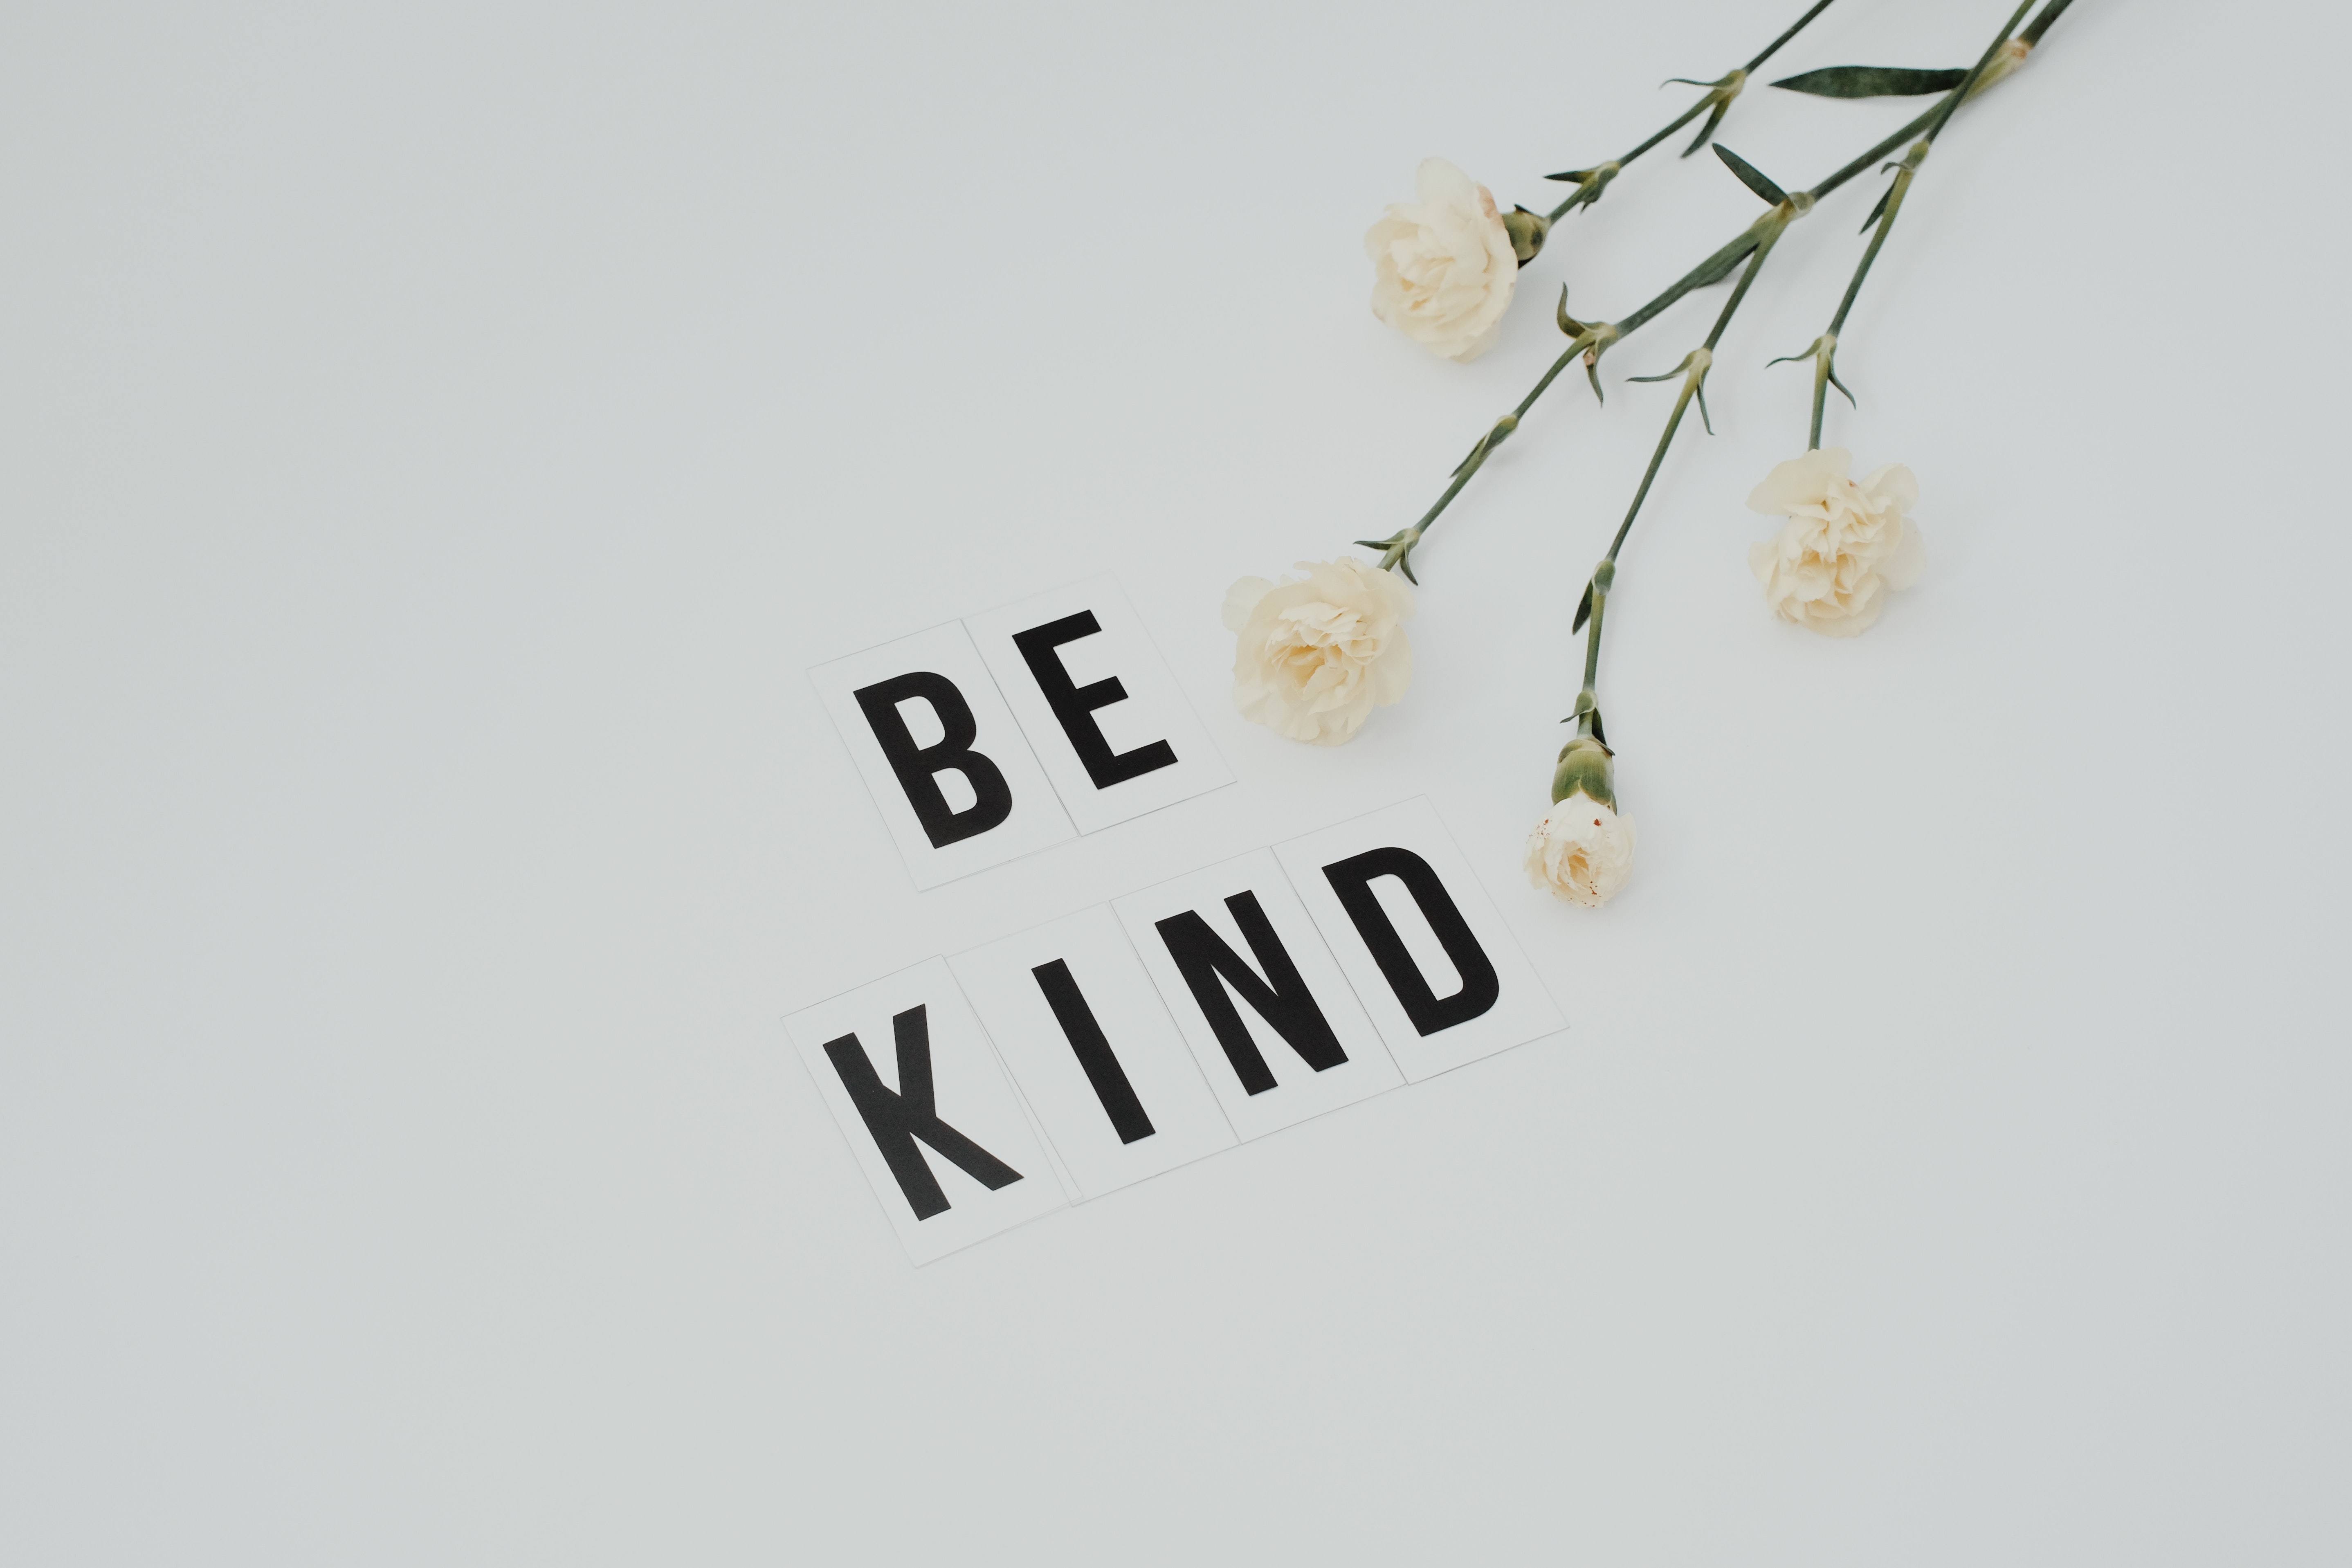 Kindness Wallpapers